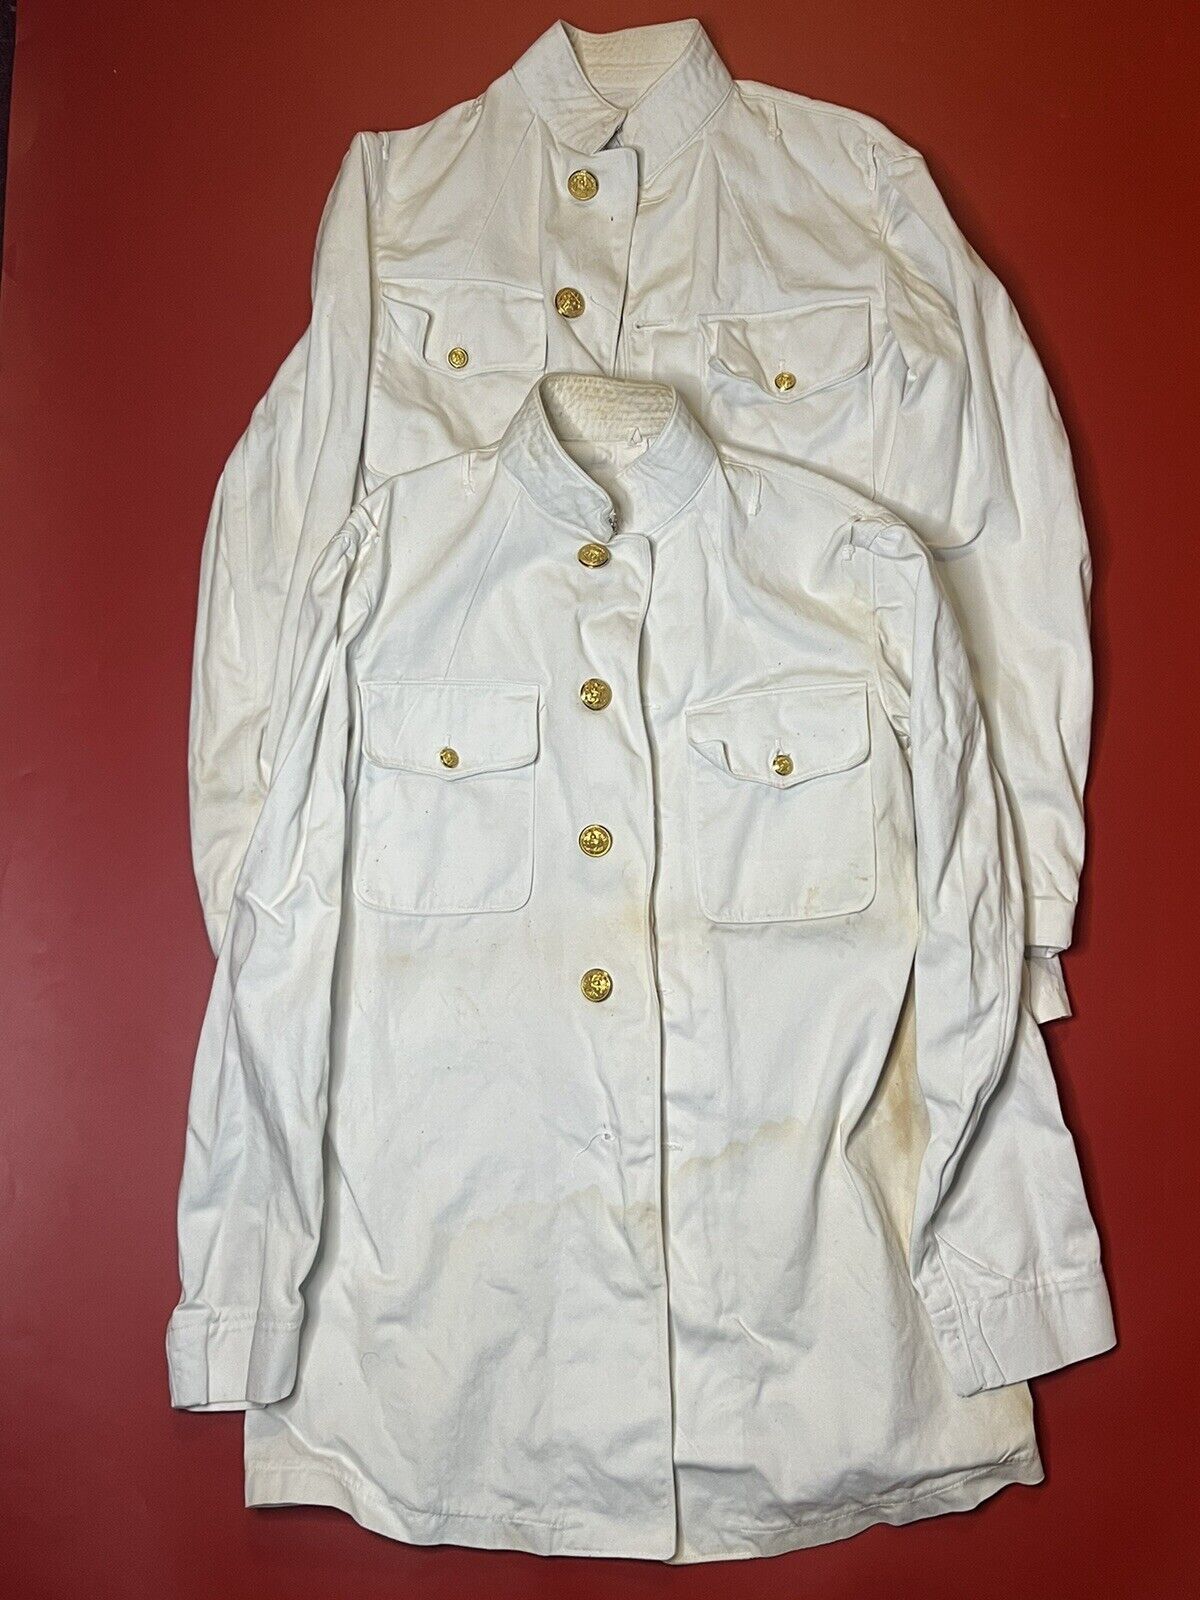 2x Vintage WW2 US Navy Whites Jacket Uniform With Water Stains See Description